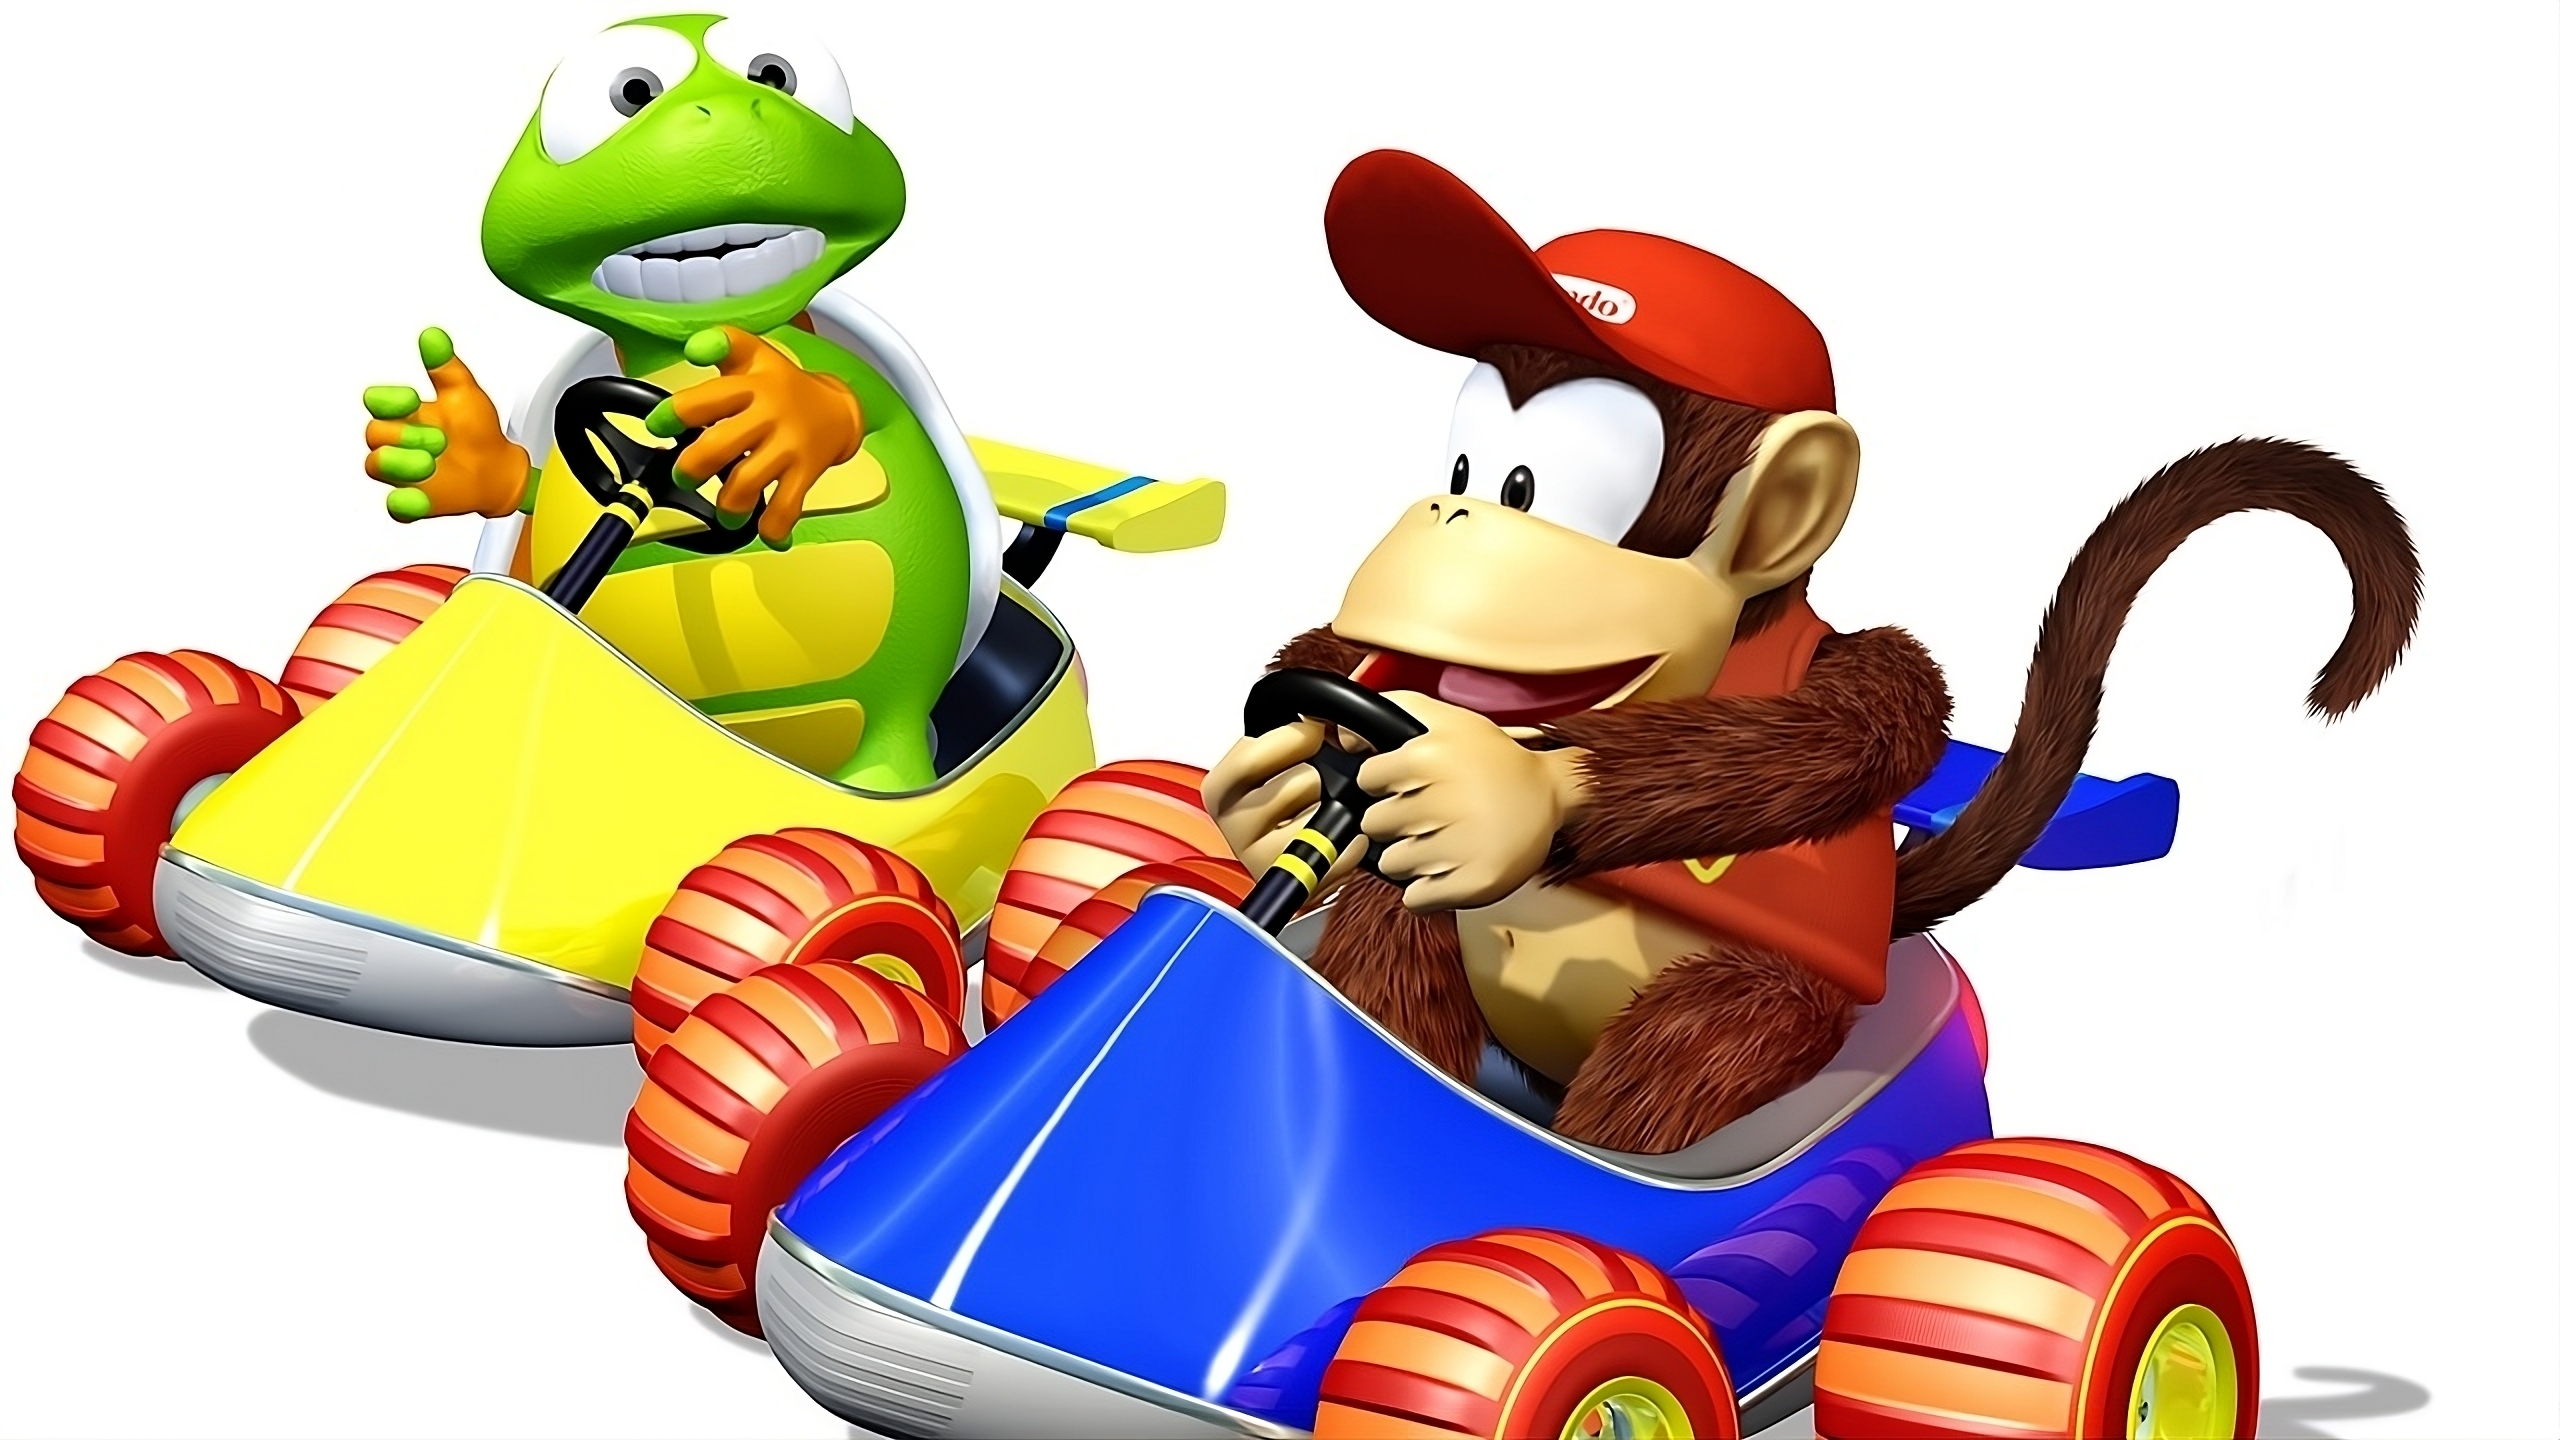 Diddy Kong Racing: Performance Patch